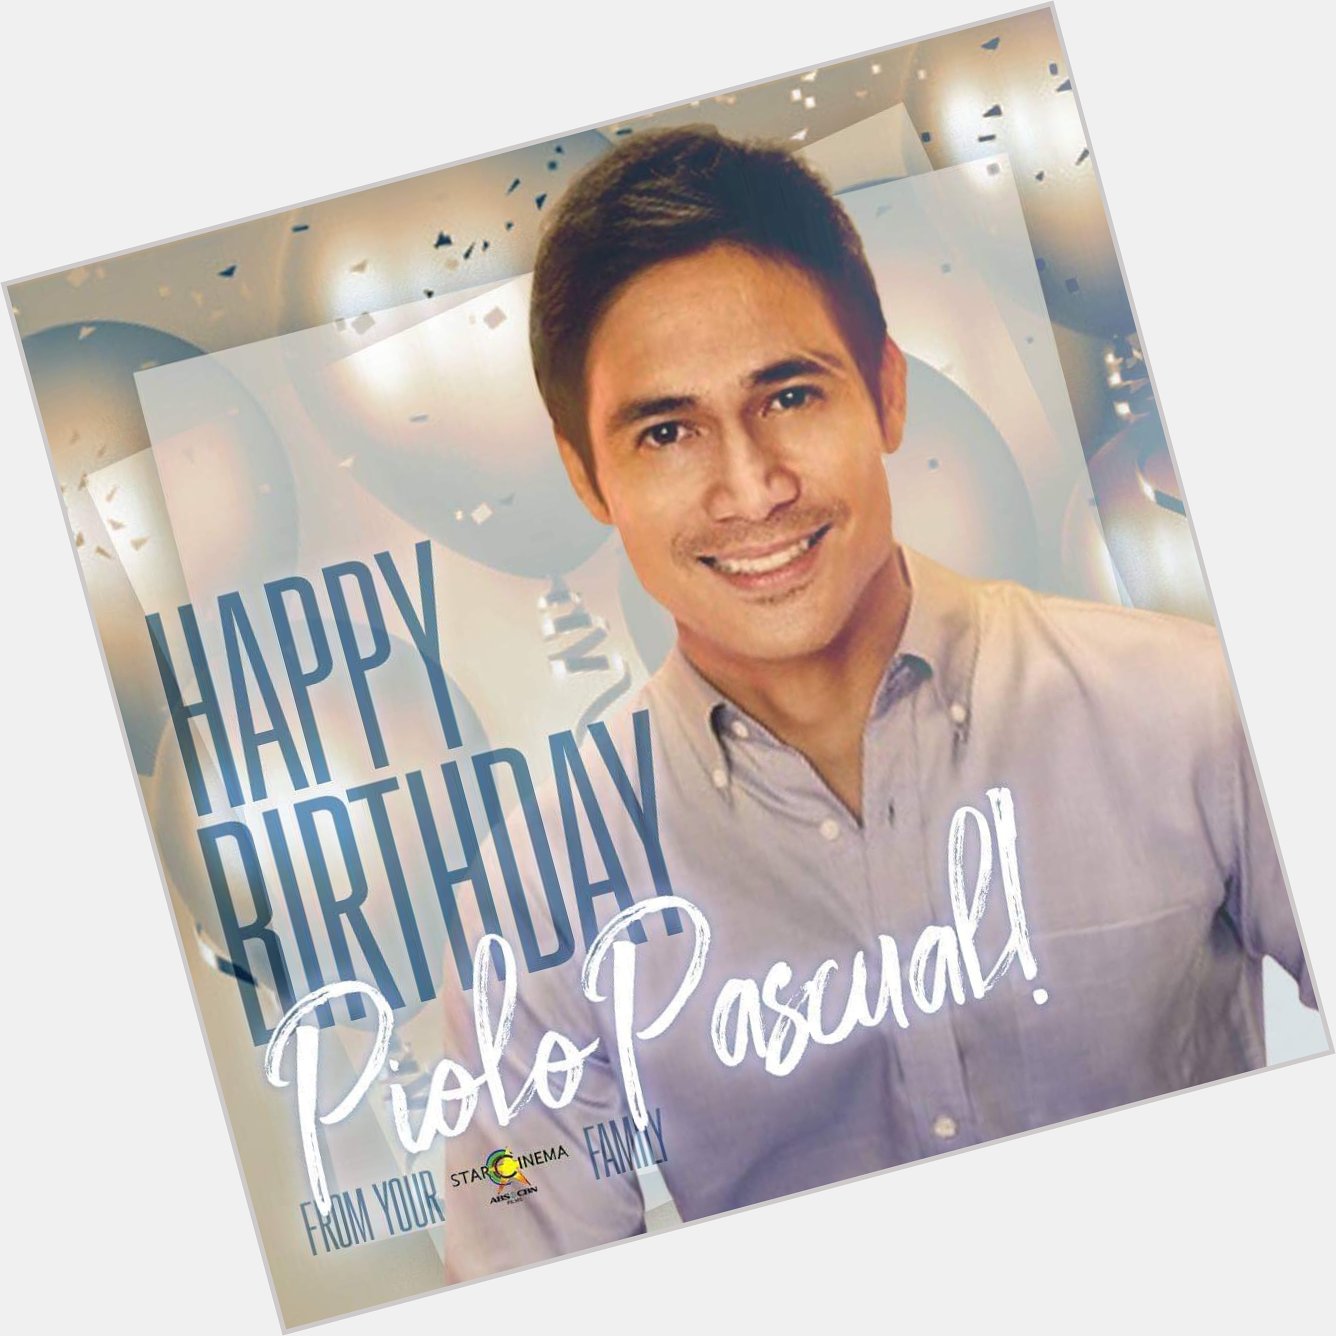 Happy birthday, Mr. Piolo Pascual! Your Star Cinema family loves you! 